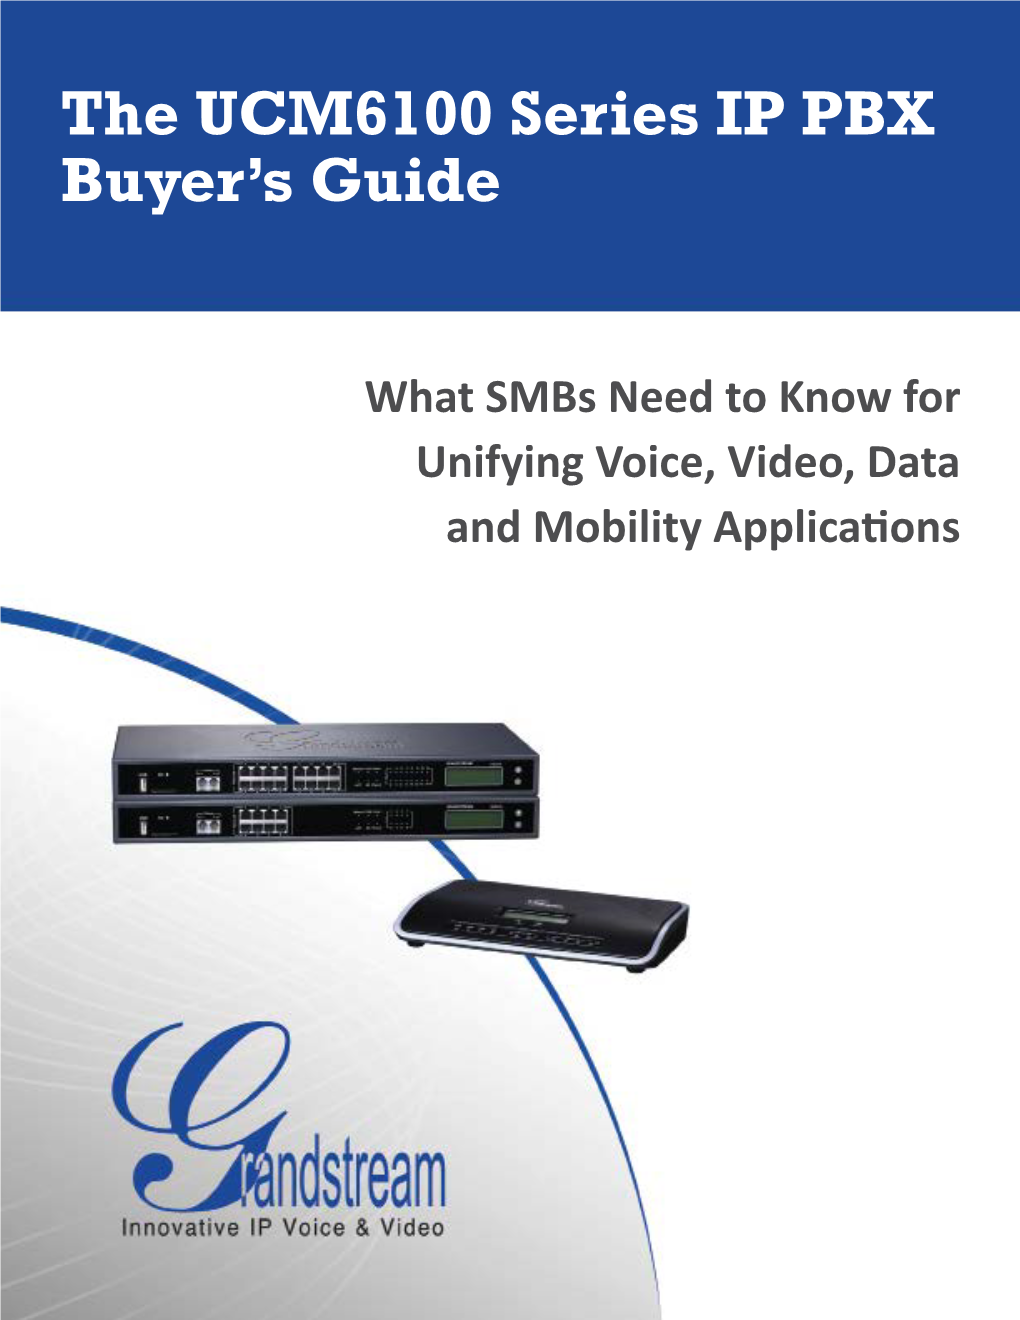 The UCM6100 Series IP PBX Buyer's Guide